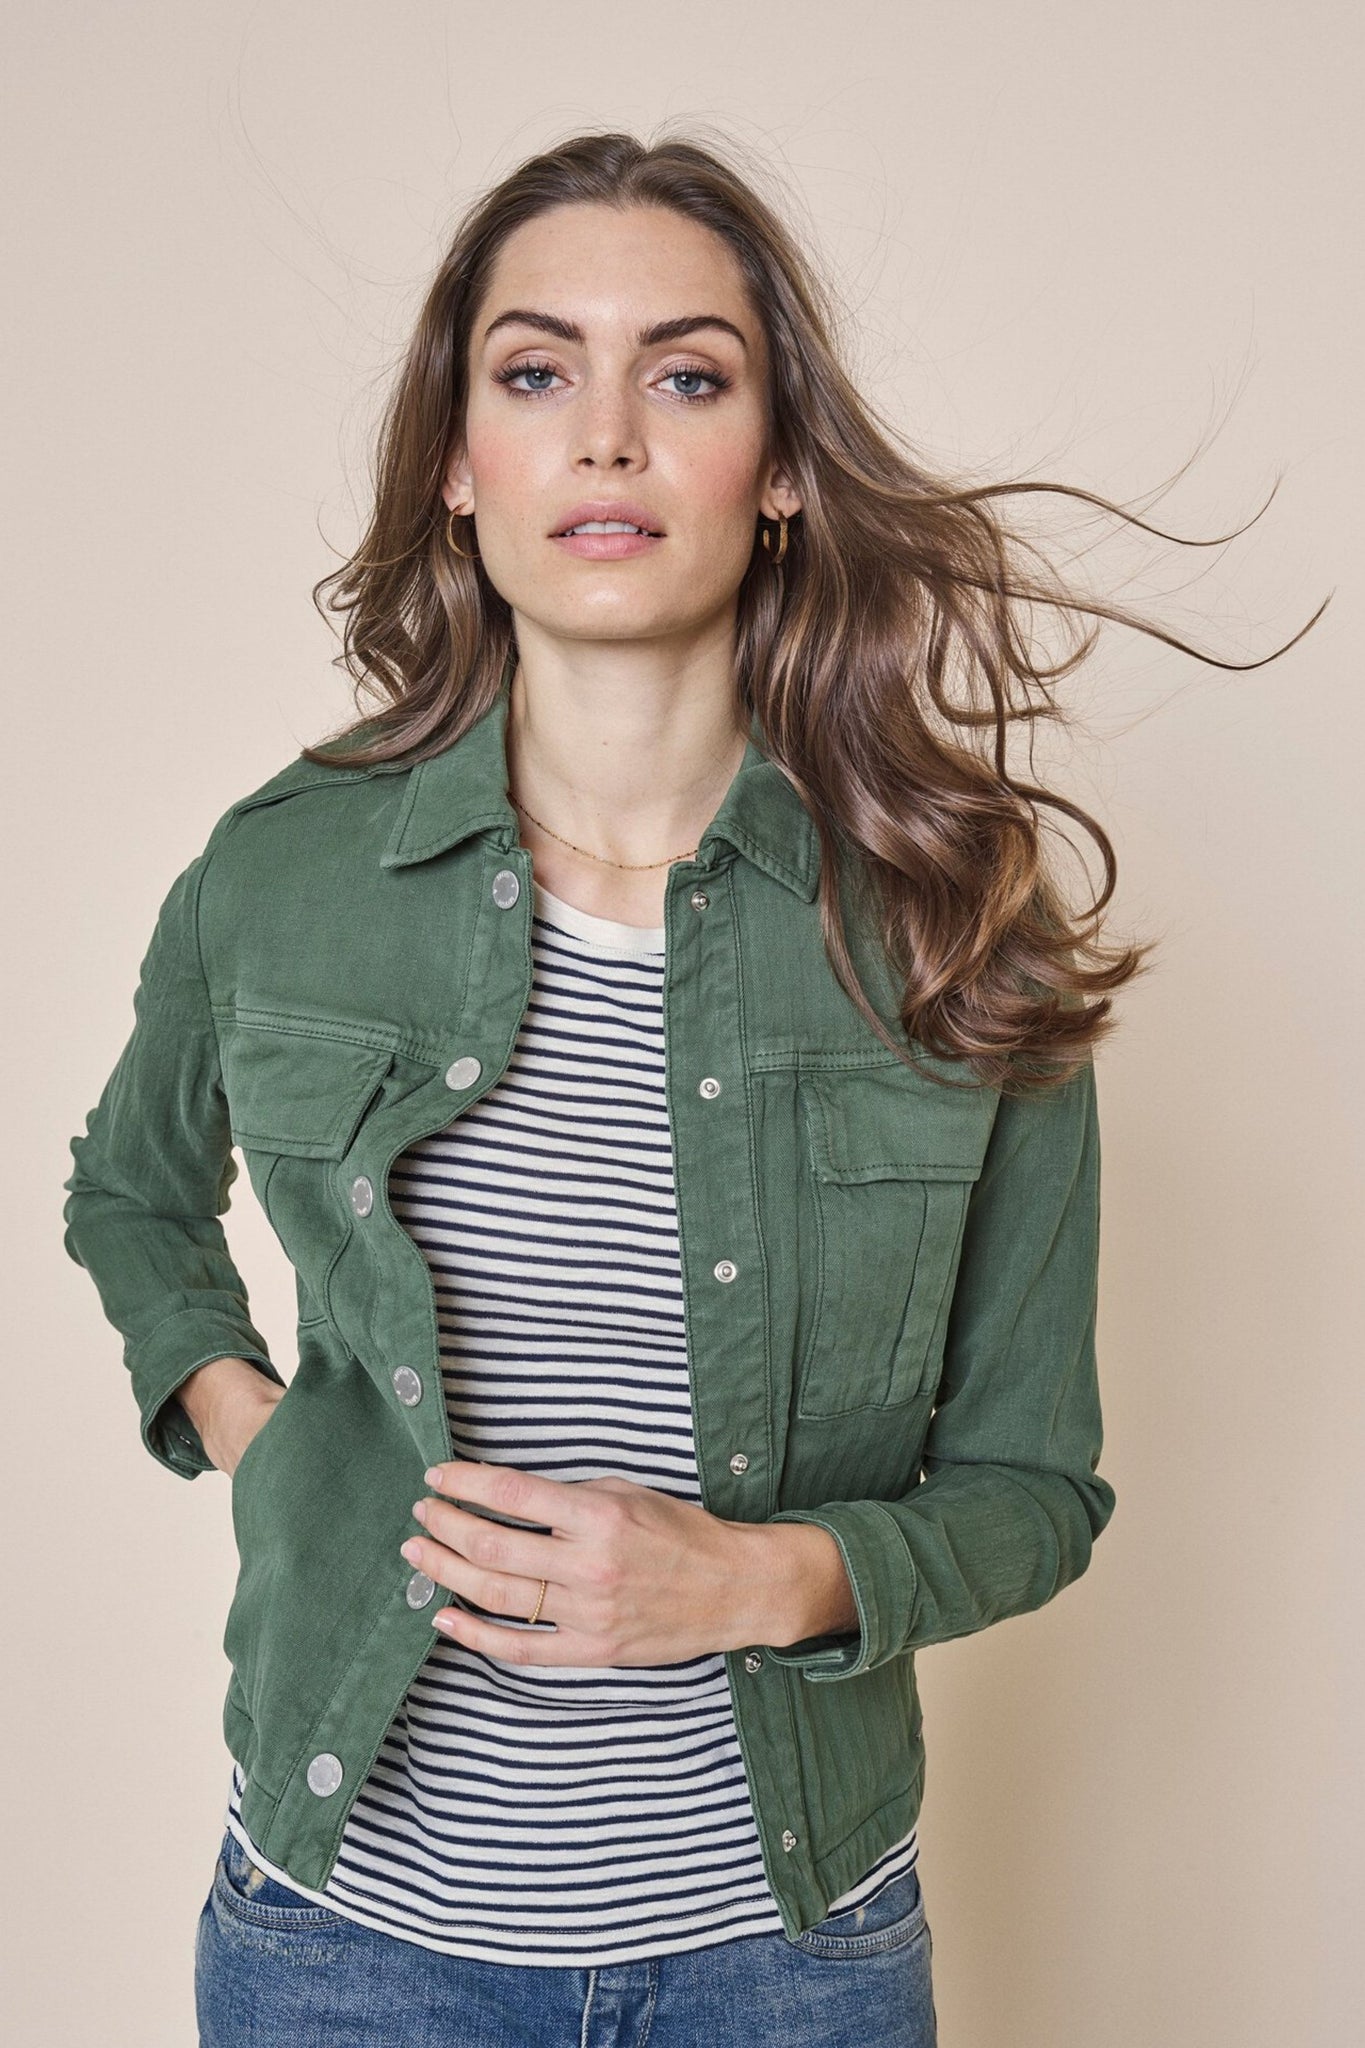 Mos Mosh Blaire Herringbone Jacket in Union Green. Khaki Green Denim Jacket with Boyfriend Fit. Double Breasted Pockets and silver hardware. 